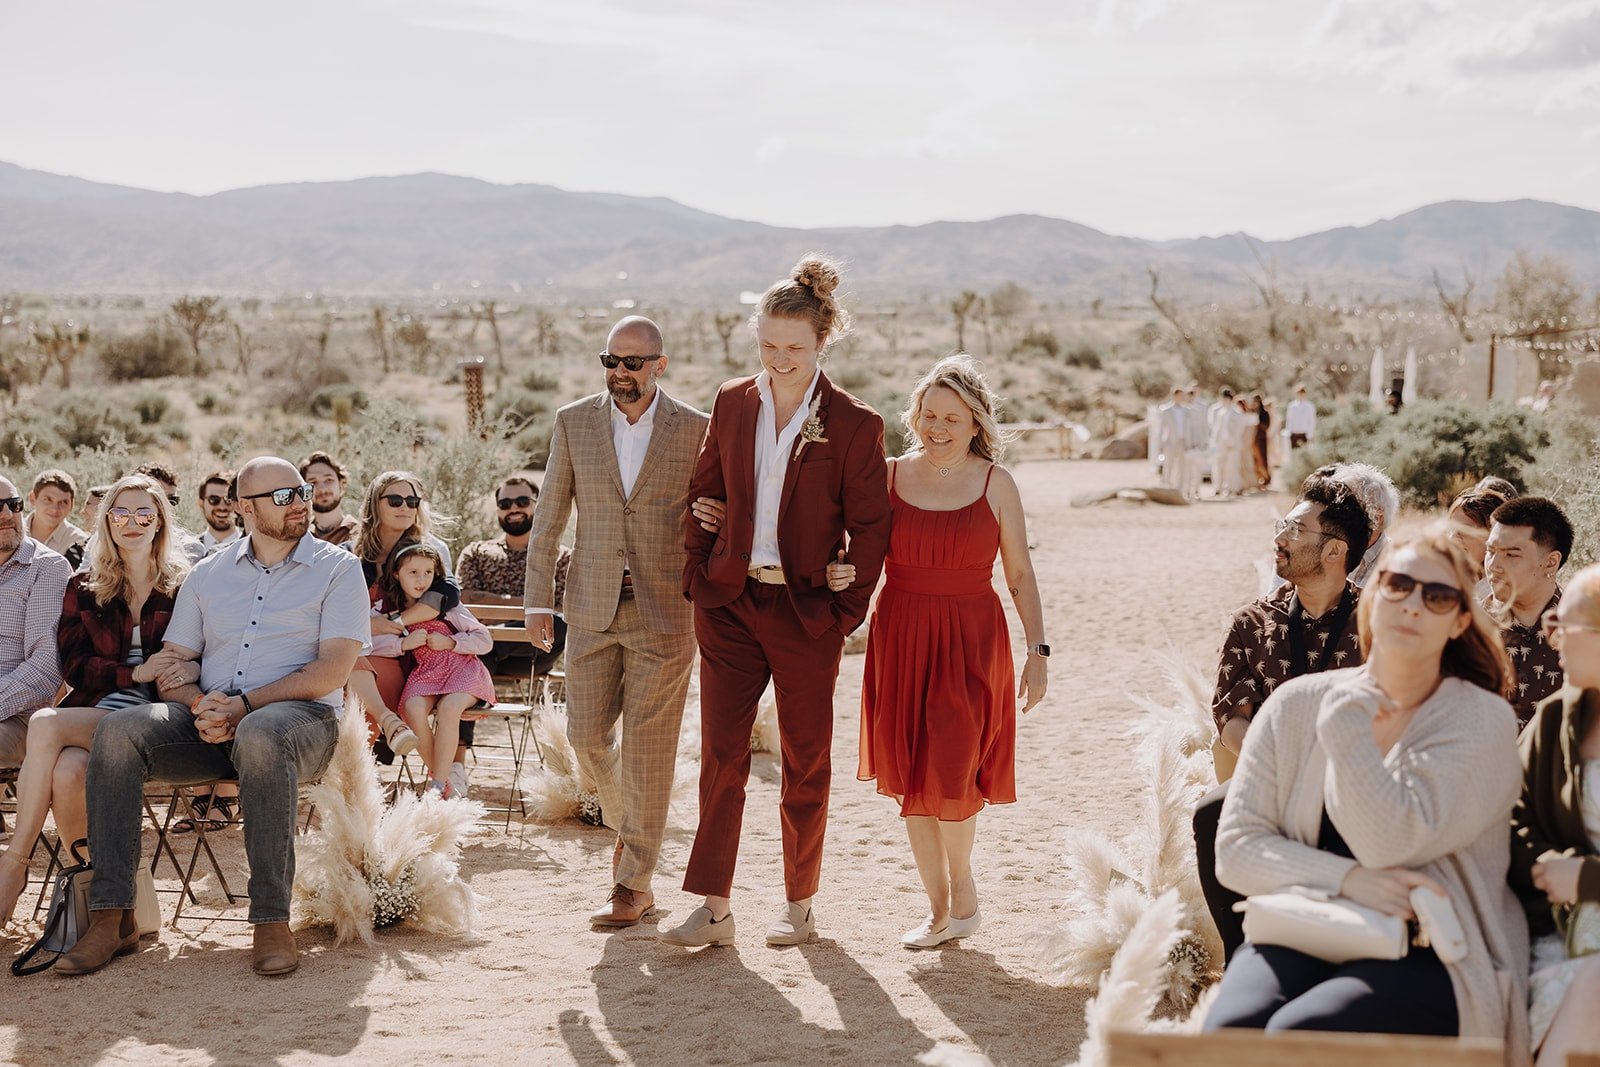 Groom enters outdoor wedding ceremony at Joshua Tree with parents